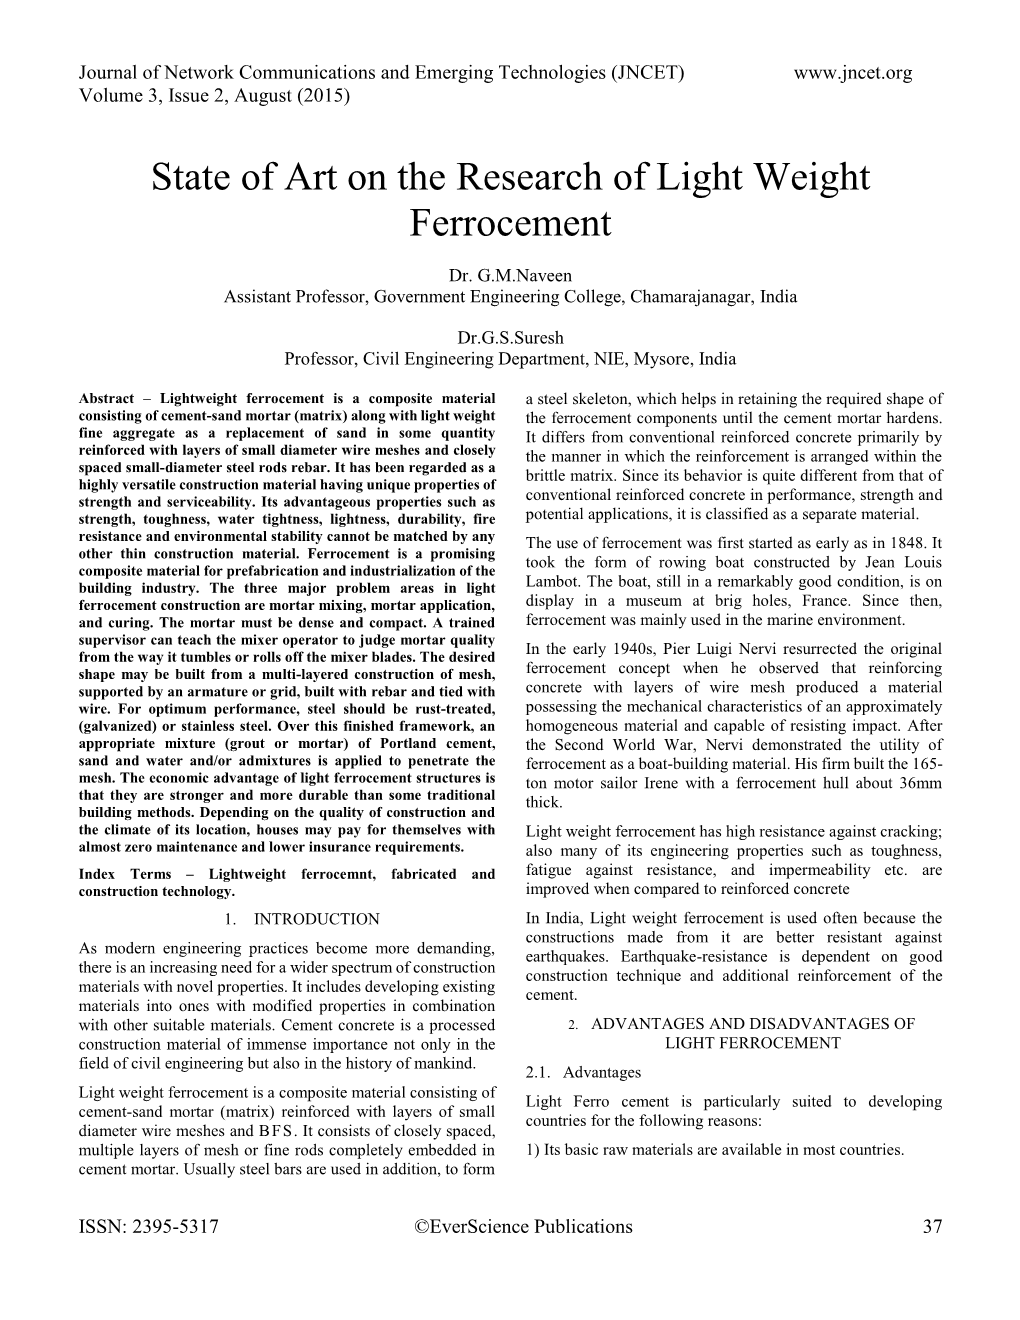 State of Art on the Research of Light Weight Ferrocement